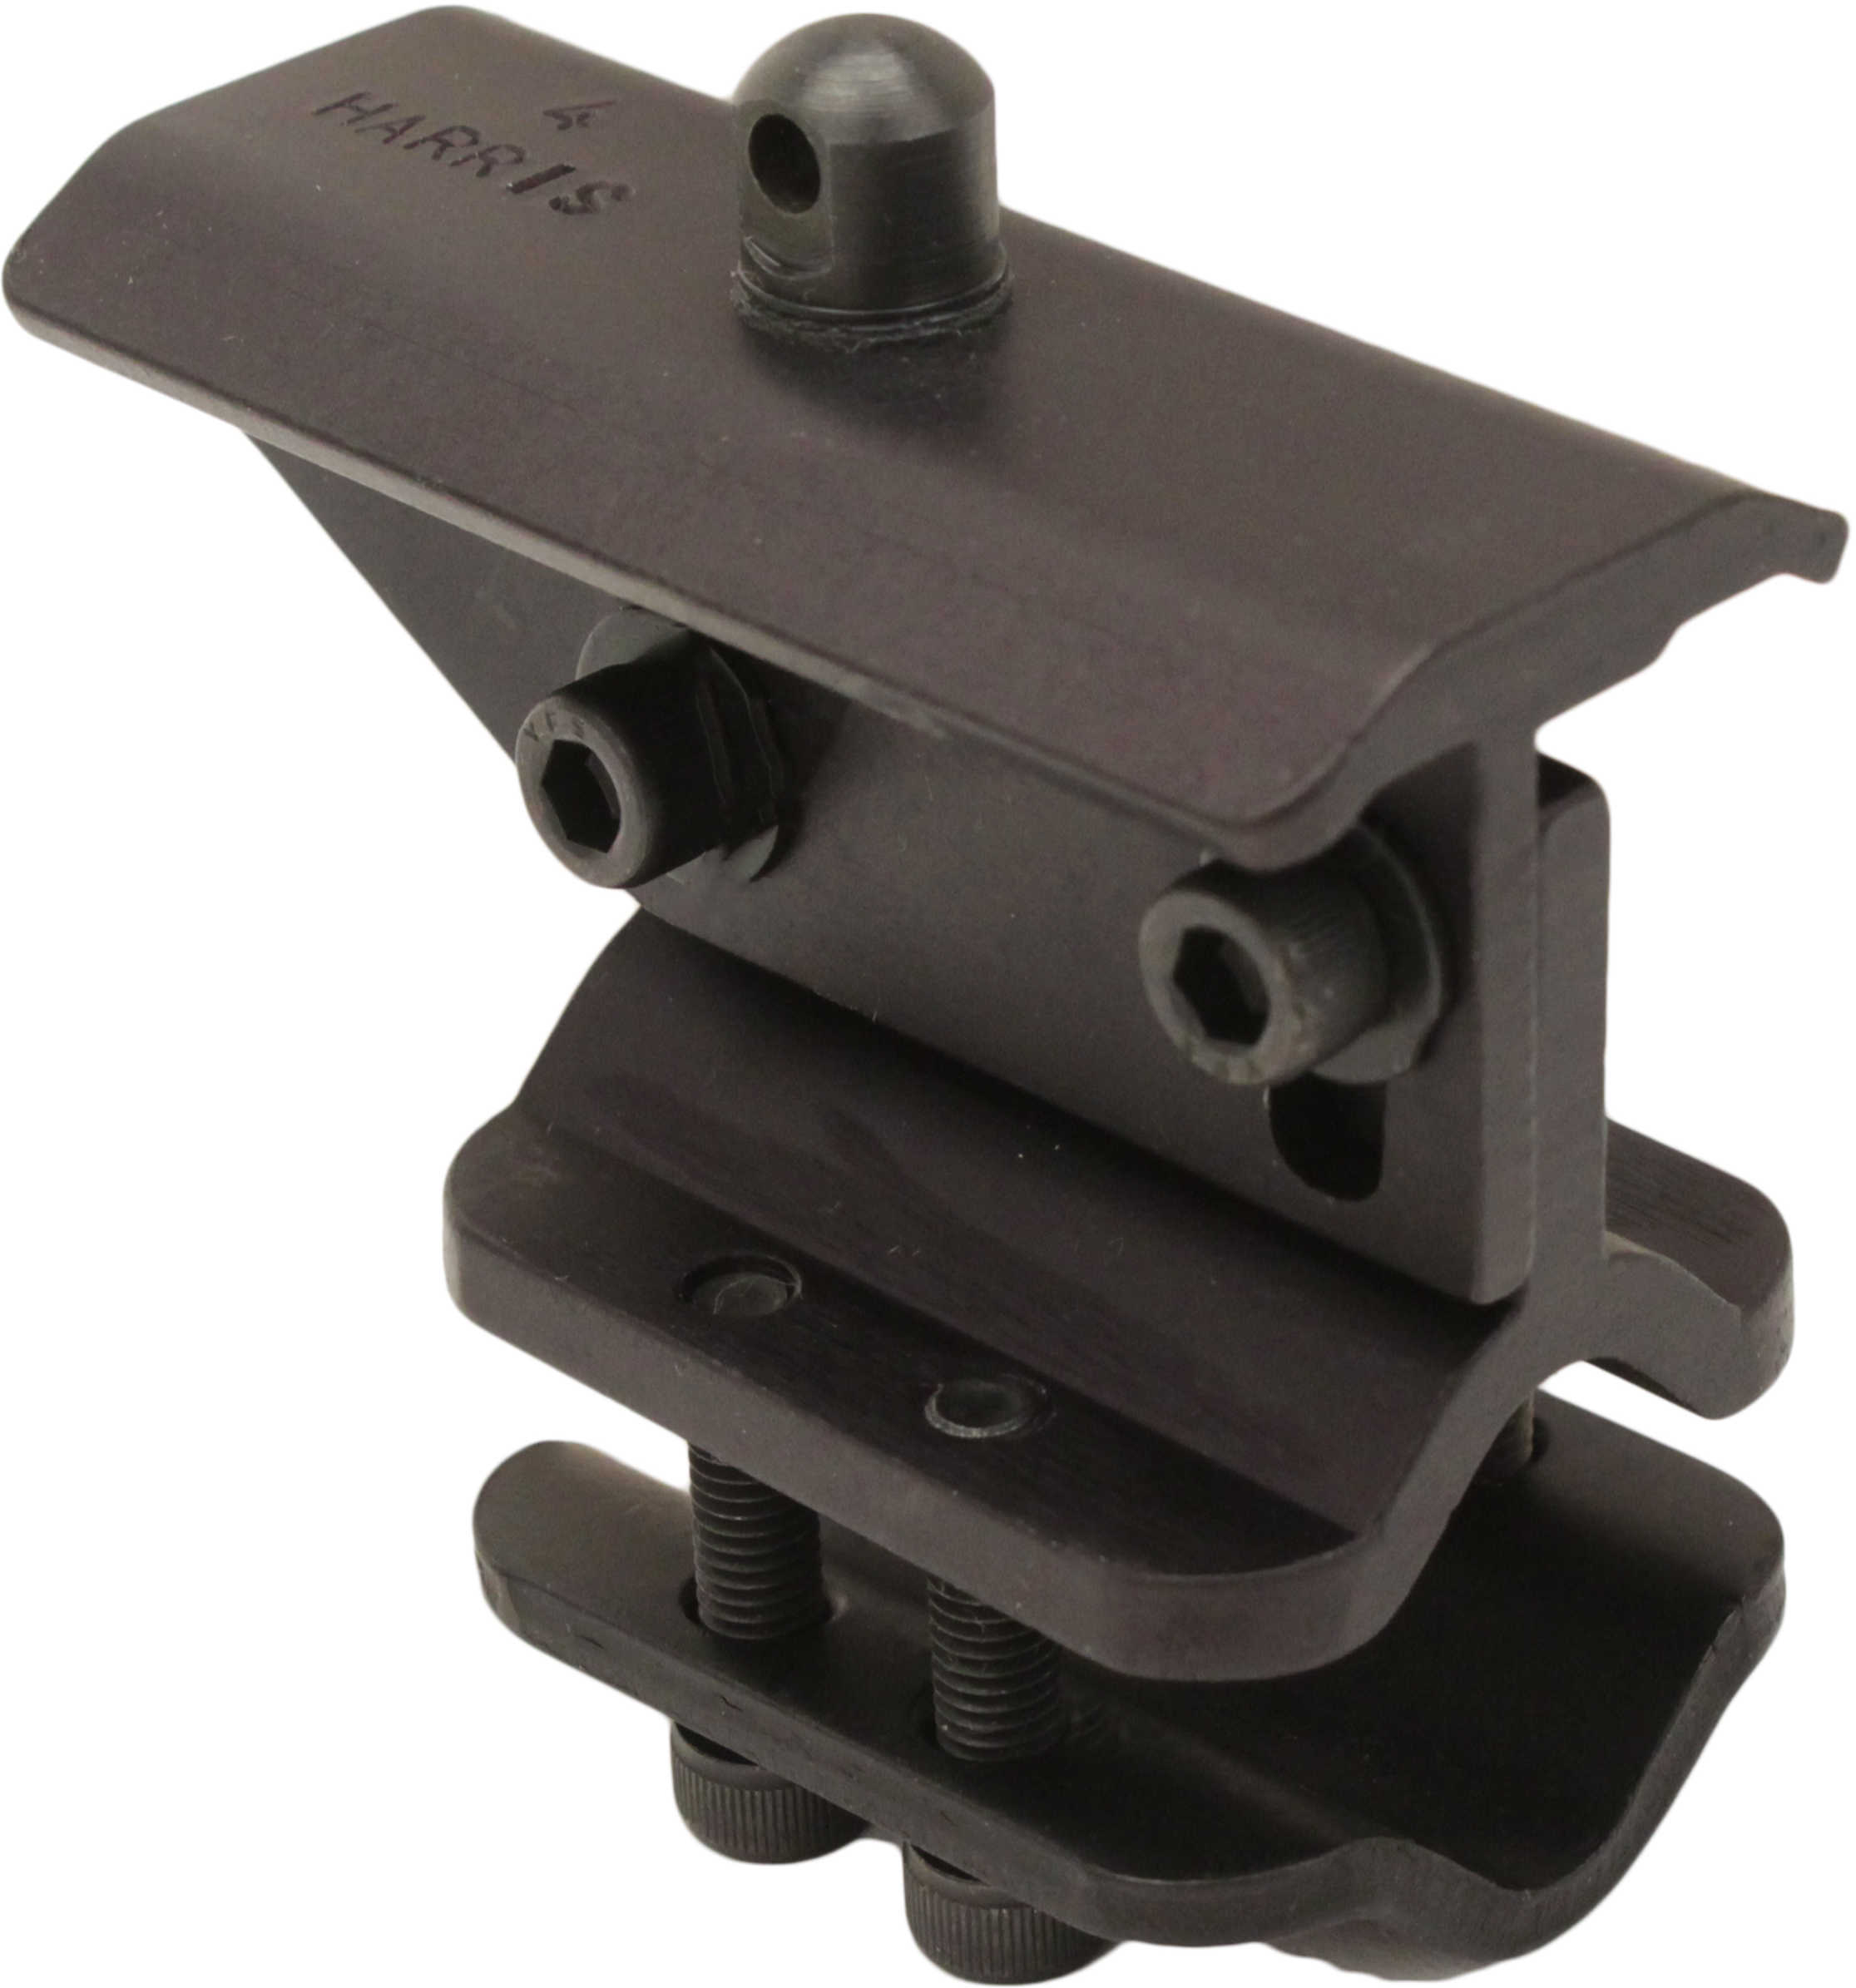 Harris Engineering Universal Adapter Requires 2" Of uncluttered Barrel For Mounting - Fits Barrels From .550" To .812" -